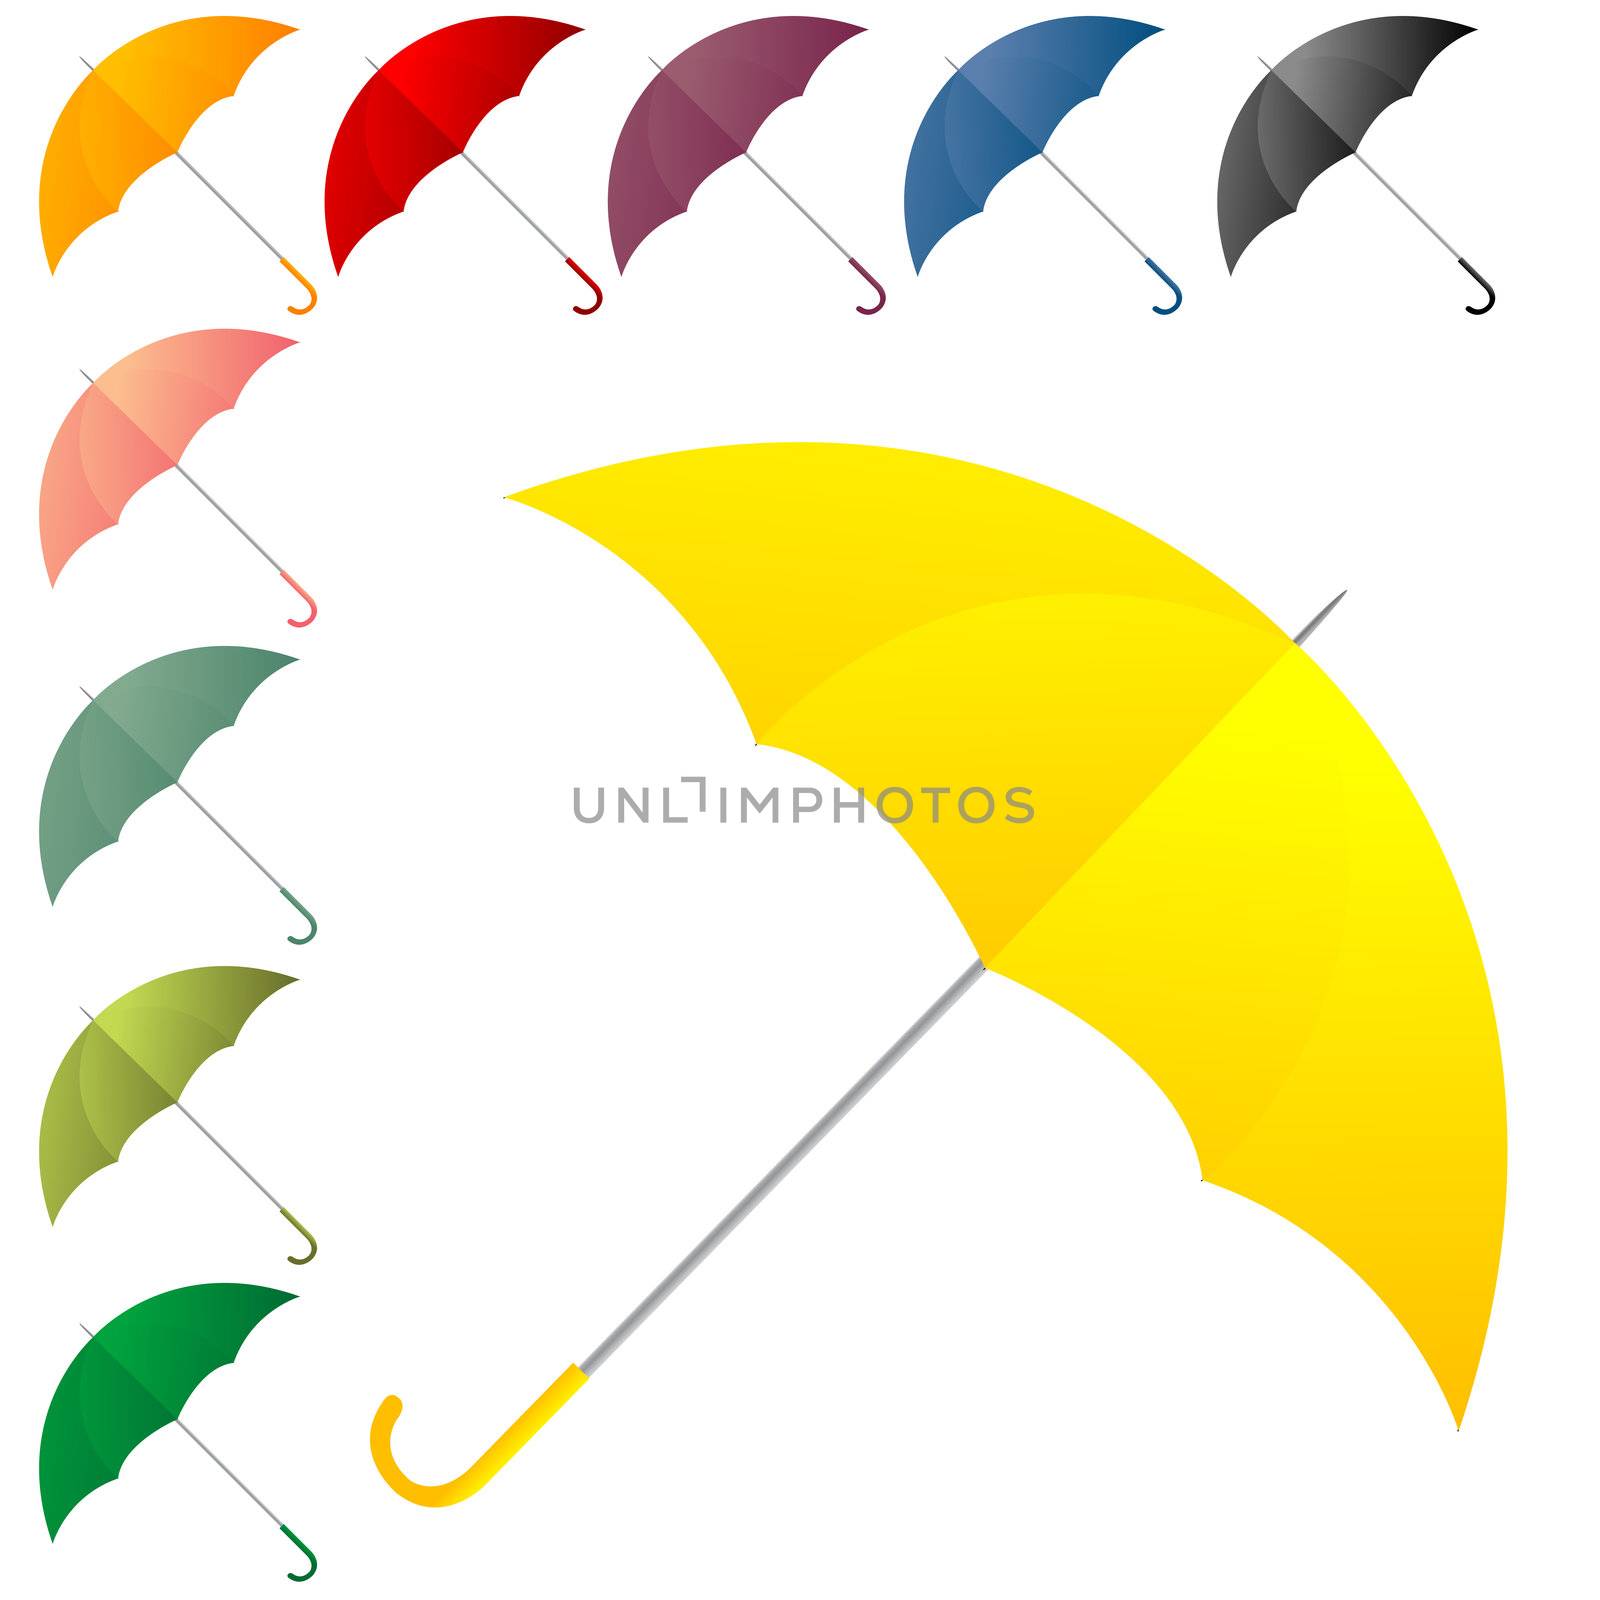 Umbrella collection by Lirch